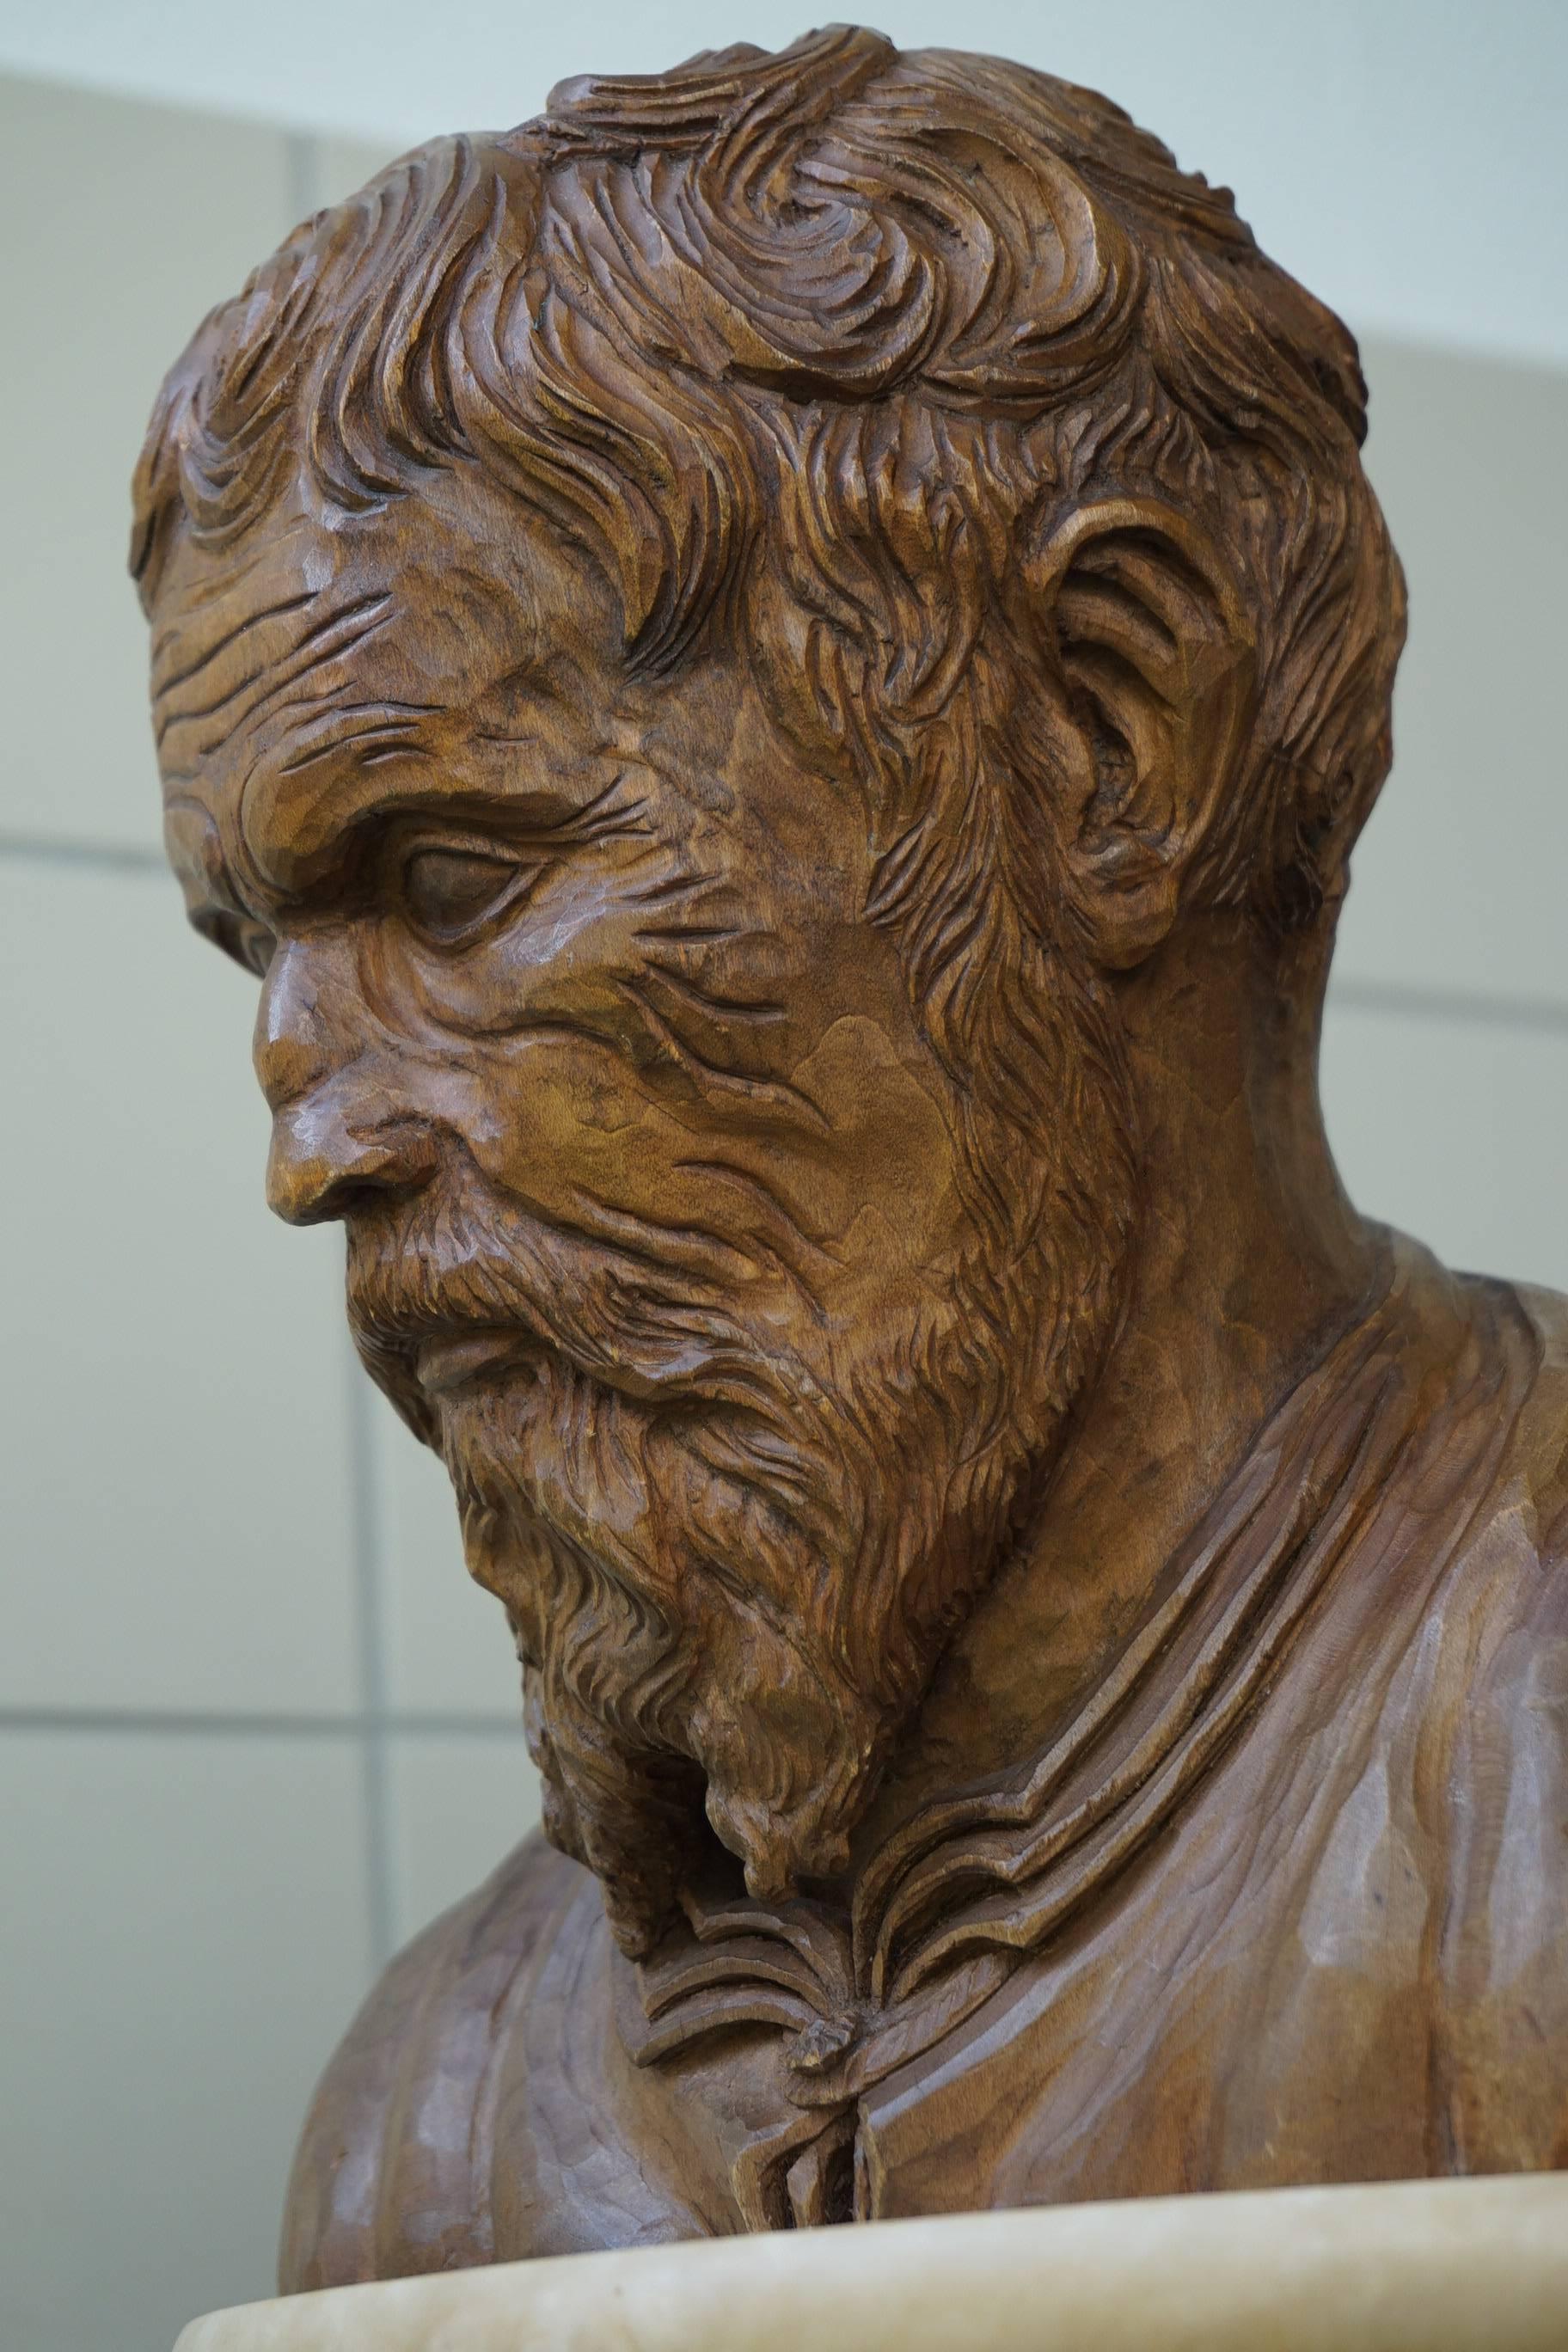 Early 20th century Michelangelo bust by German sculptor Walther Kieser (1894-1947).

If you are an artist and particularly a sculptor then one of the biggest of all time to respect and look up to, must be the genius Michelangelo. The skilled